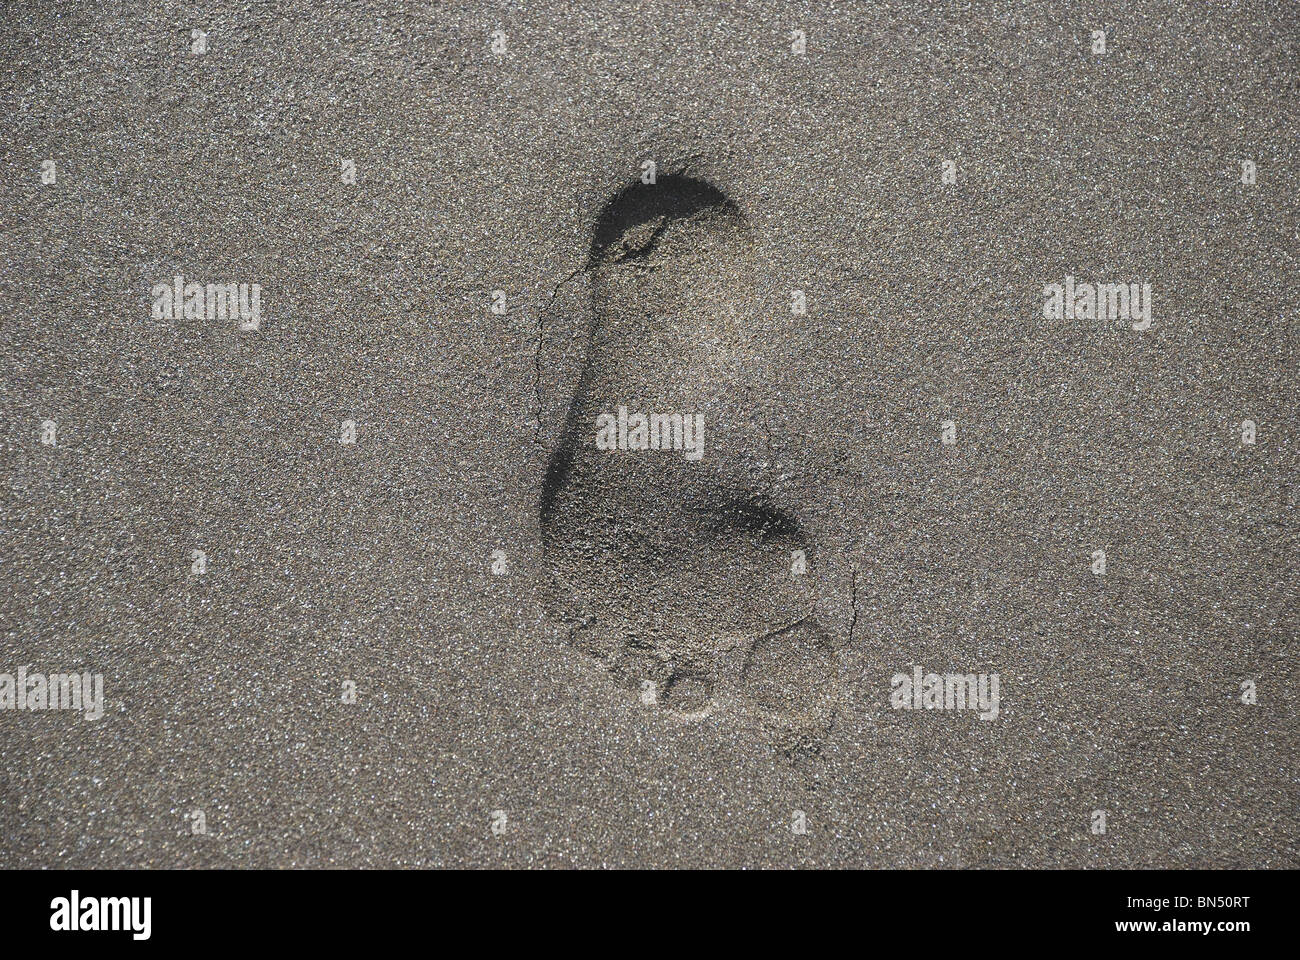 An impression of a human foot engraved in wet sea sand Stock Photo